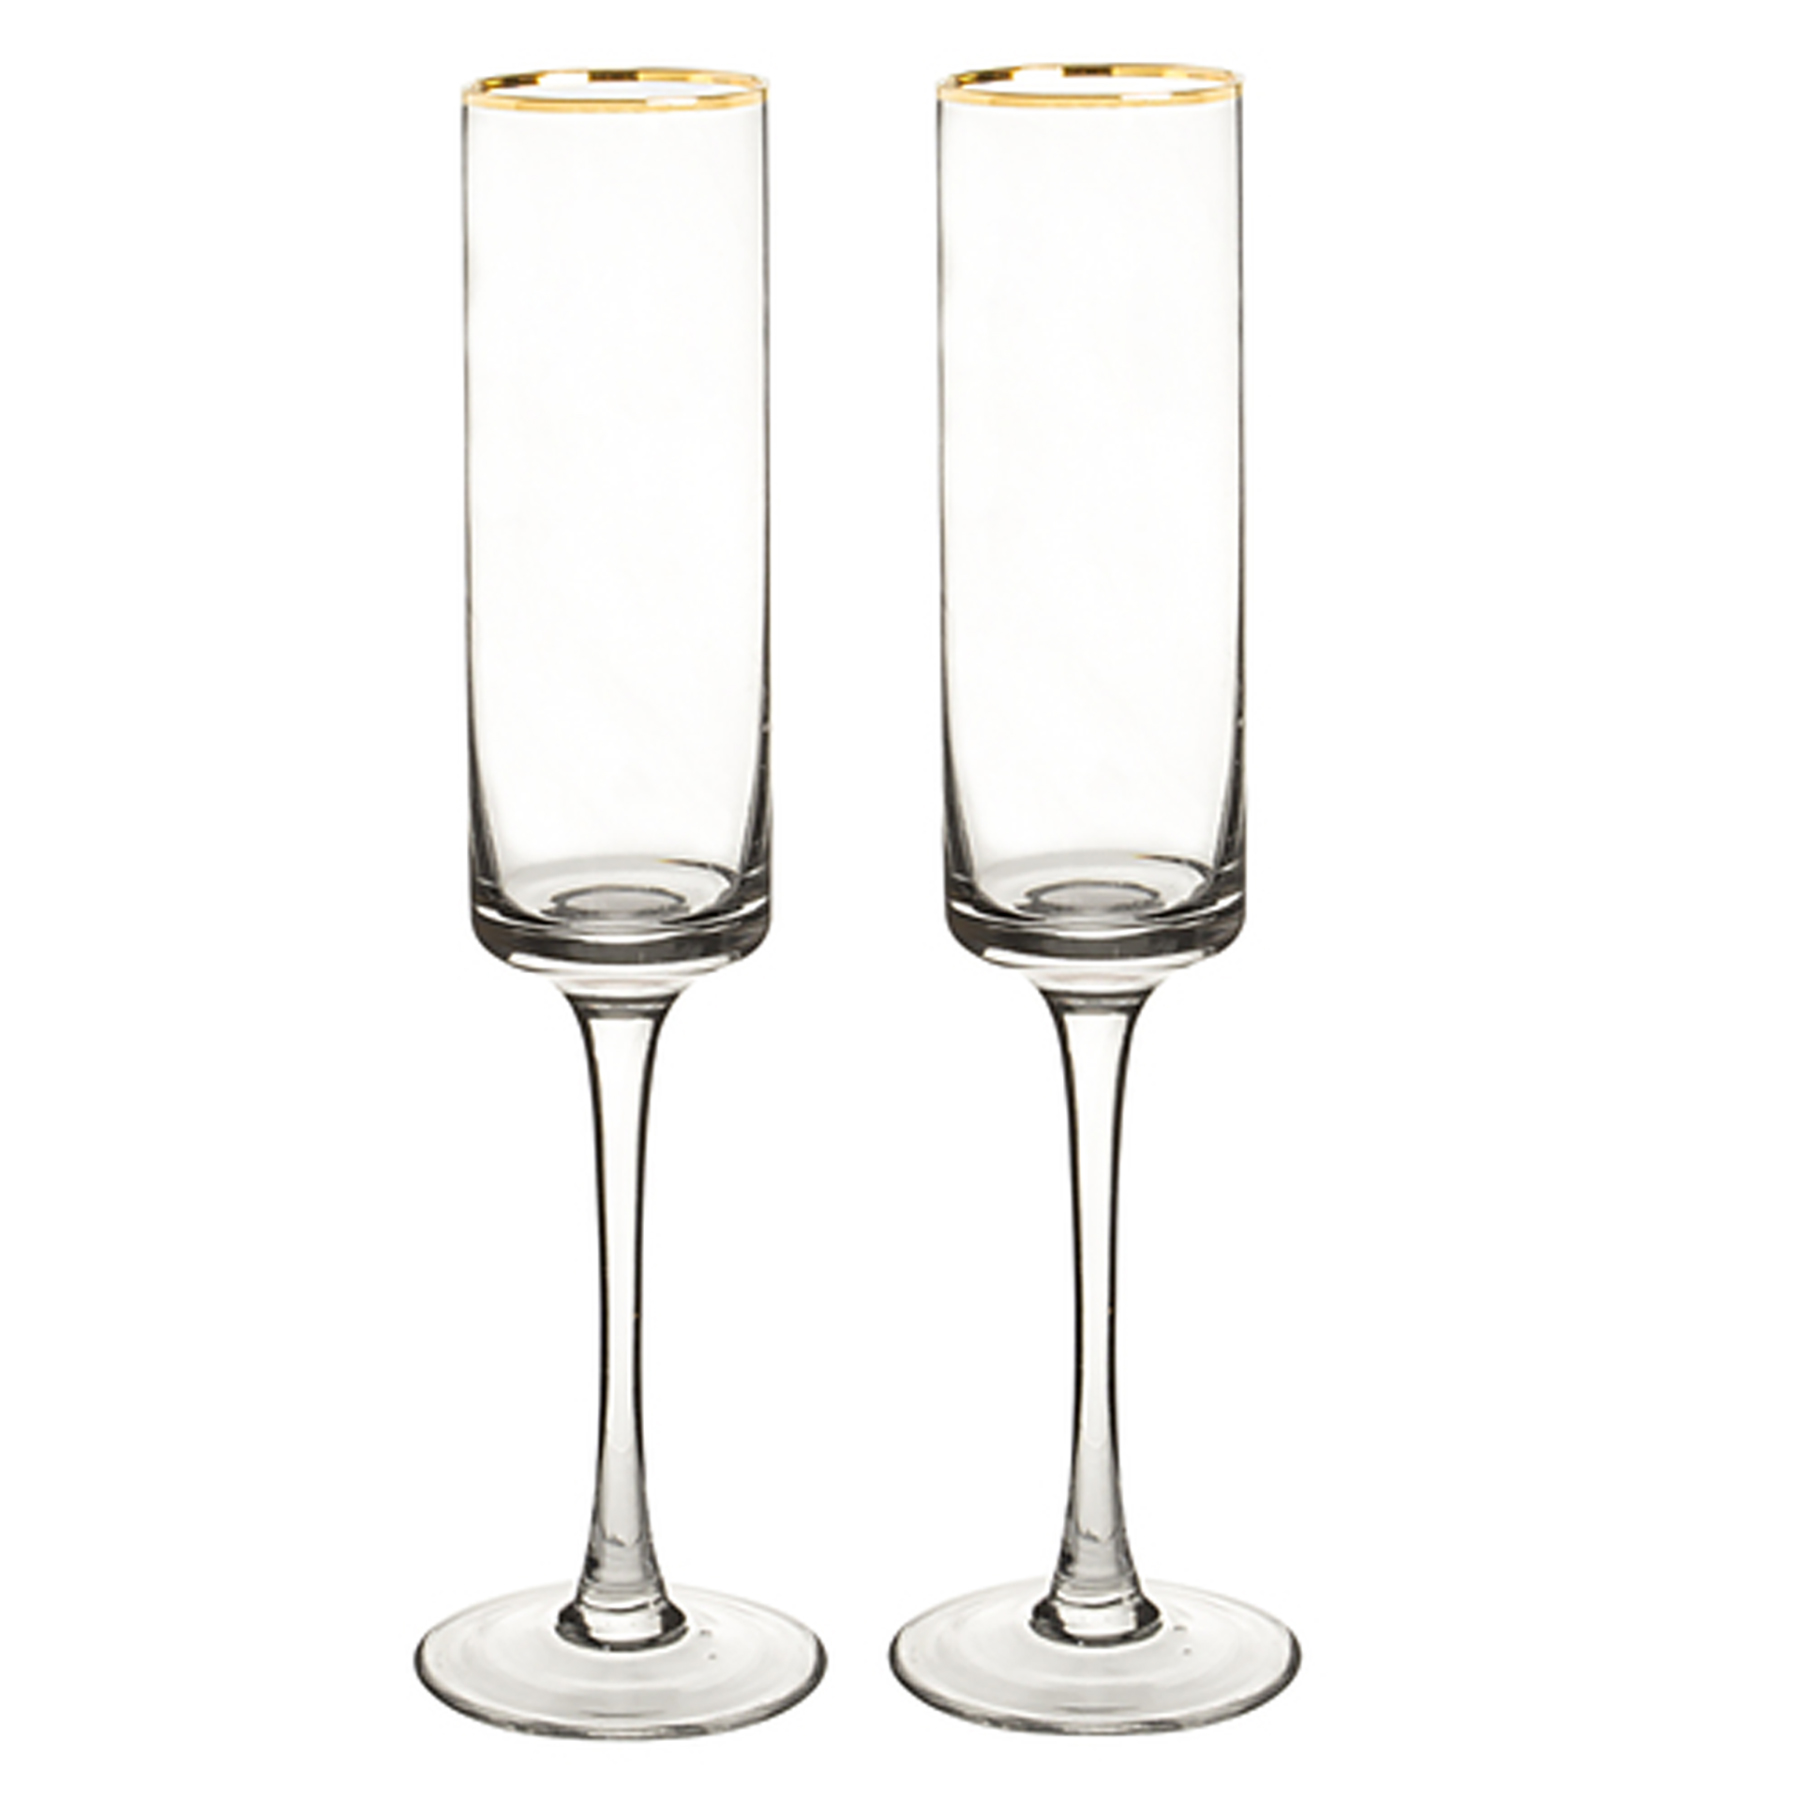 Gold Rim Triangular Champagne Flute — The Basketry